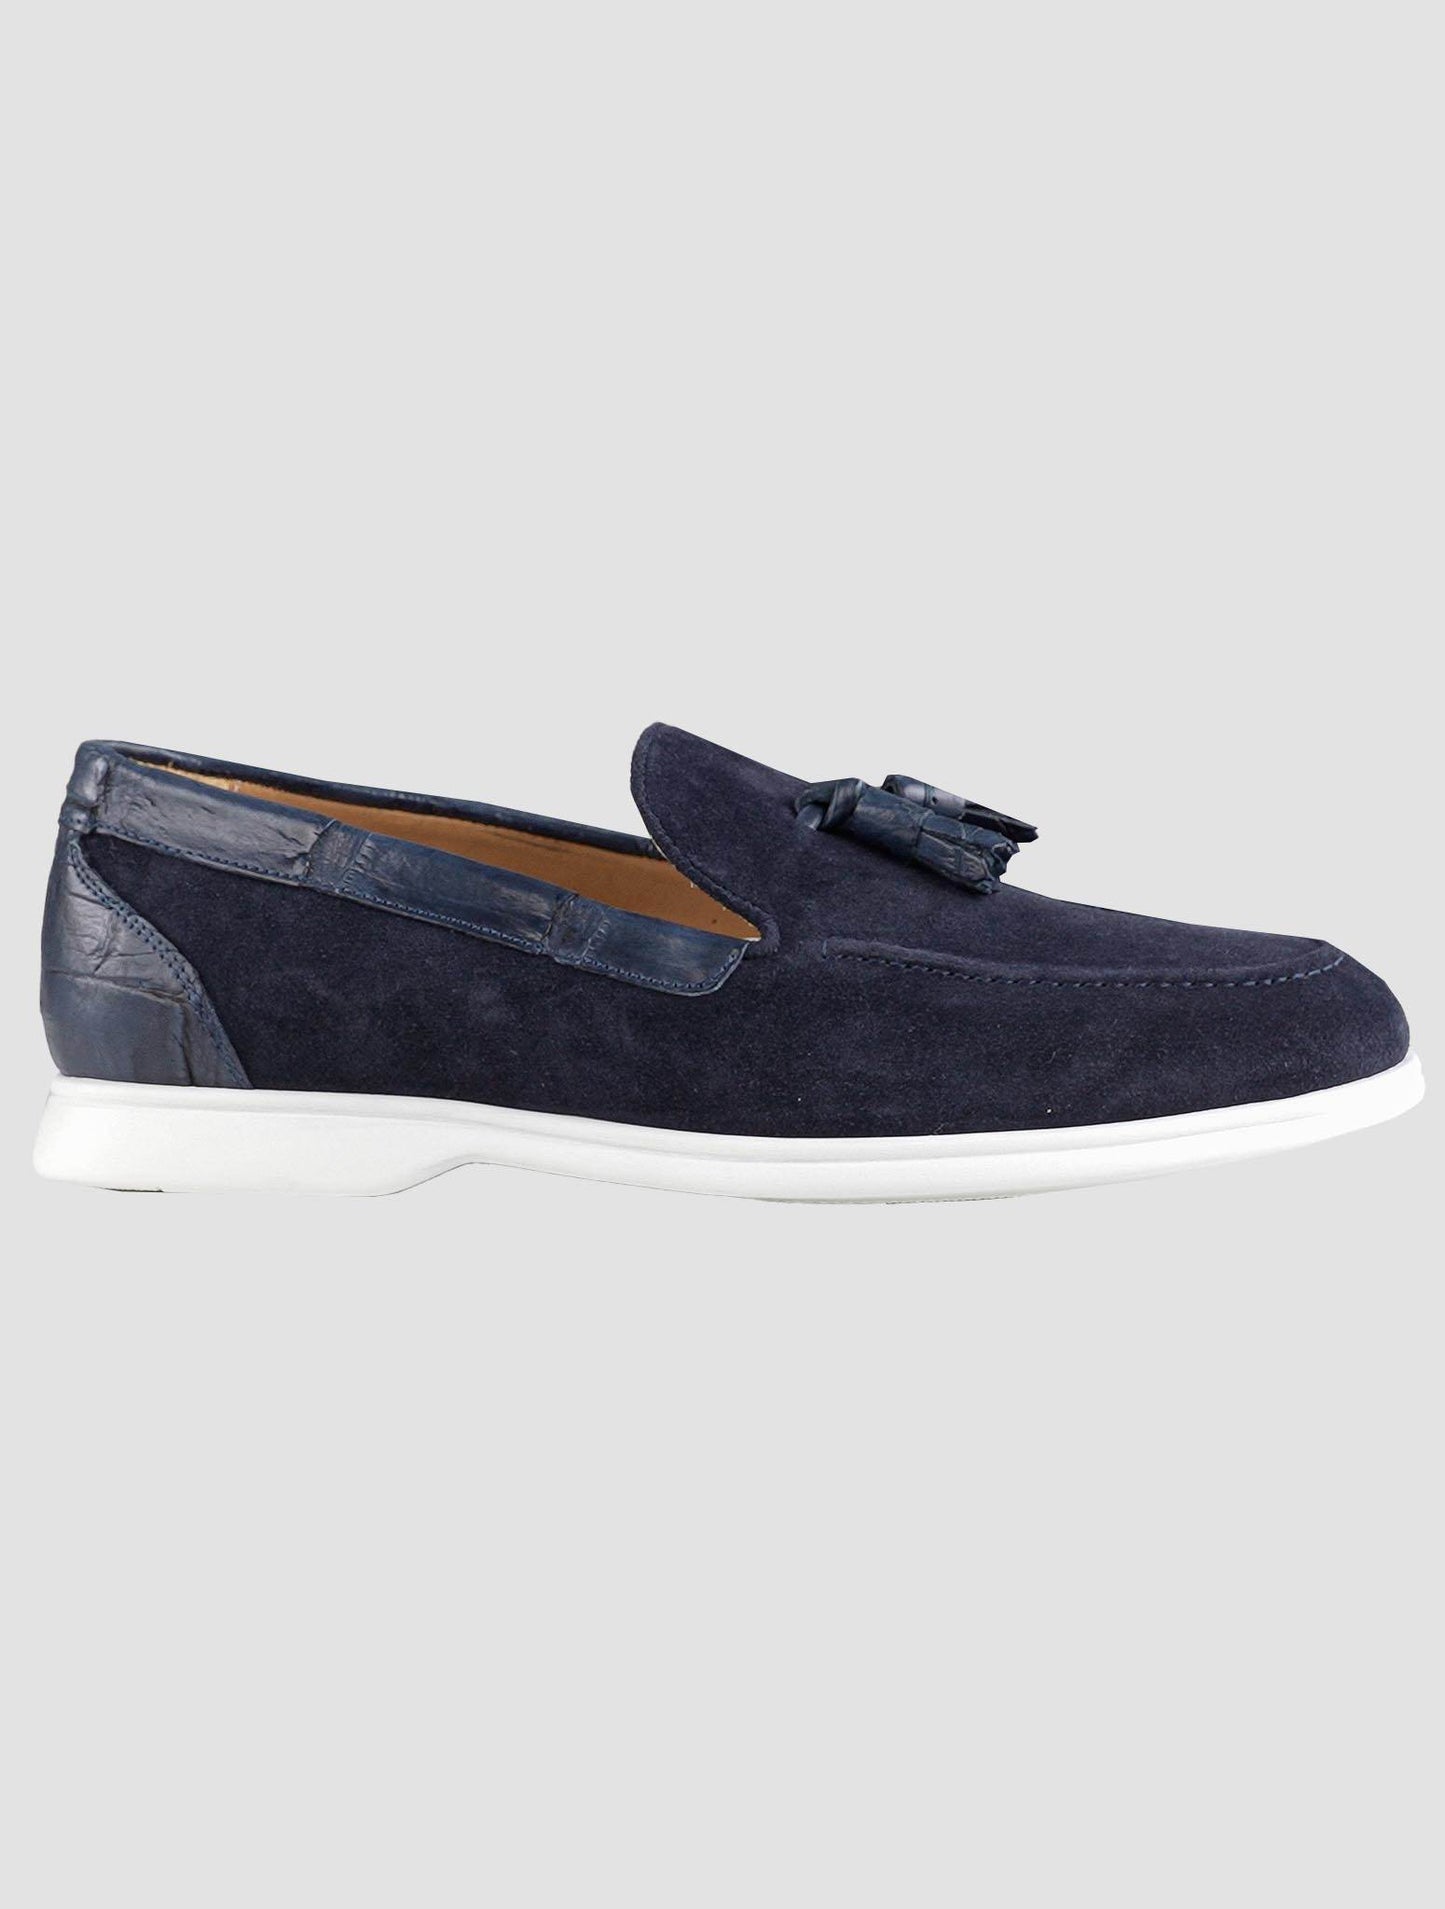 Kiton Blue Leather Crocodile Leather Suede Loafers